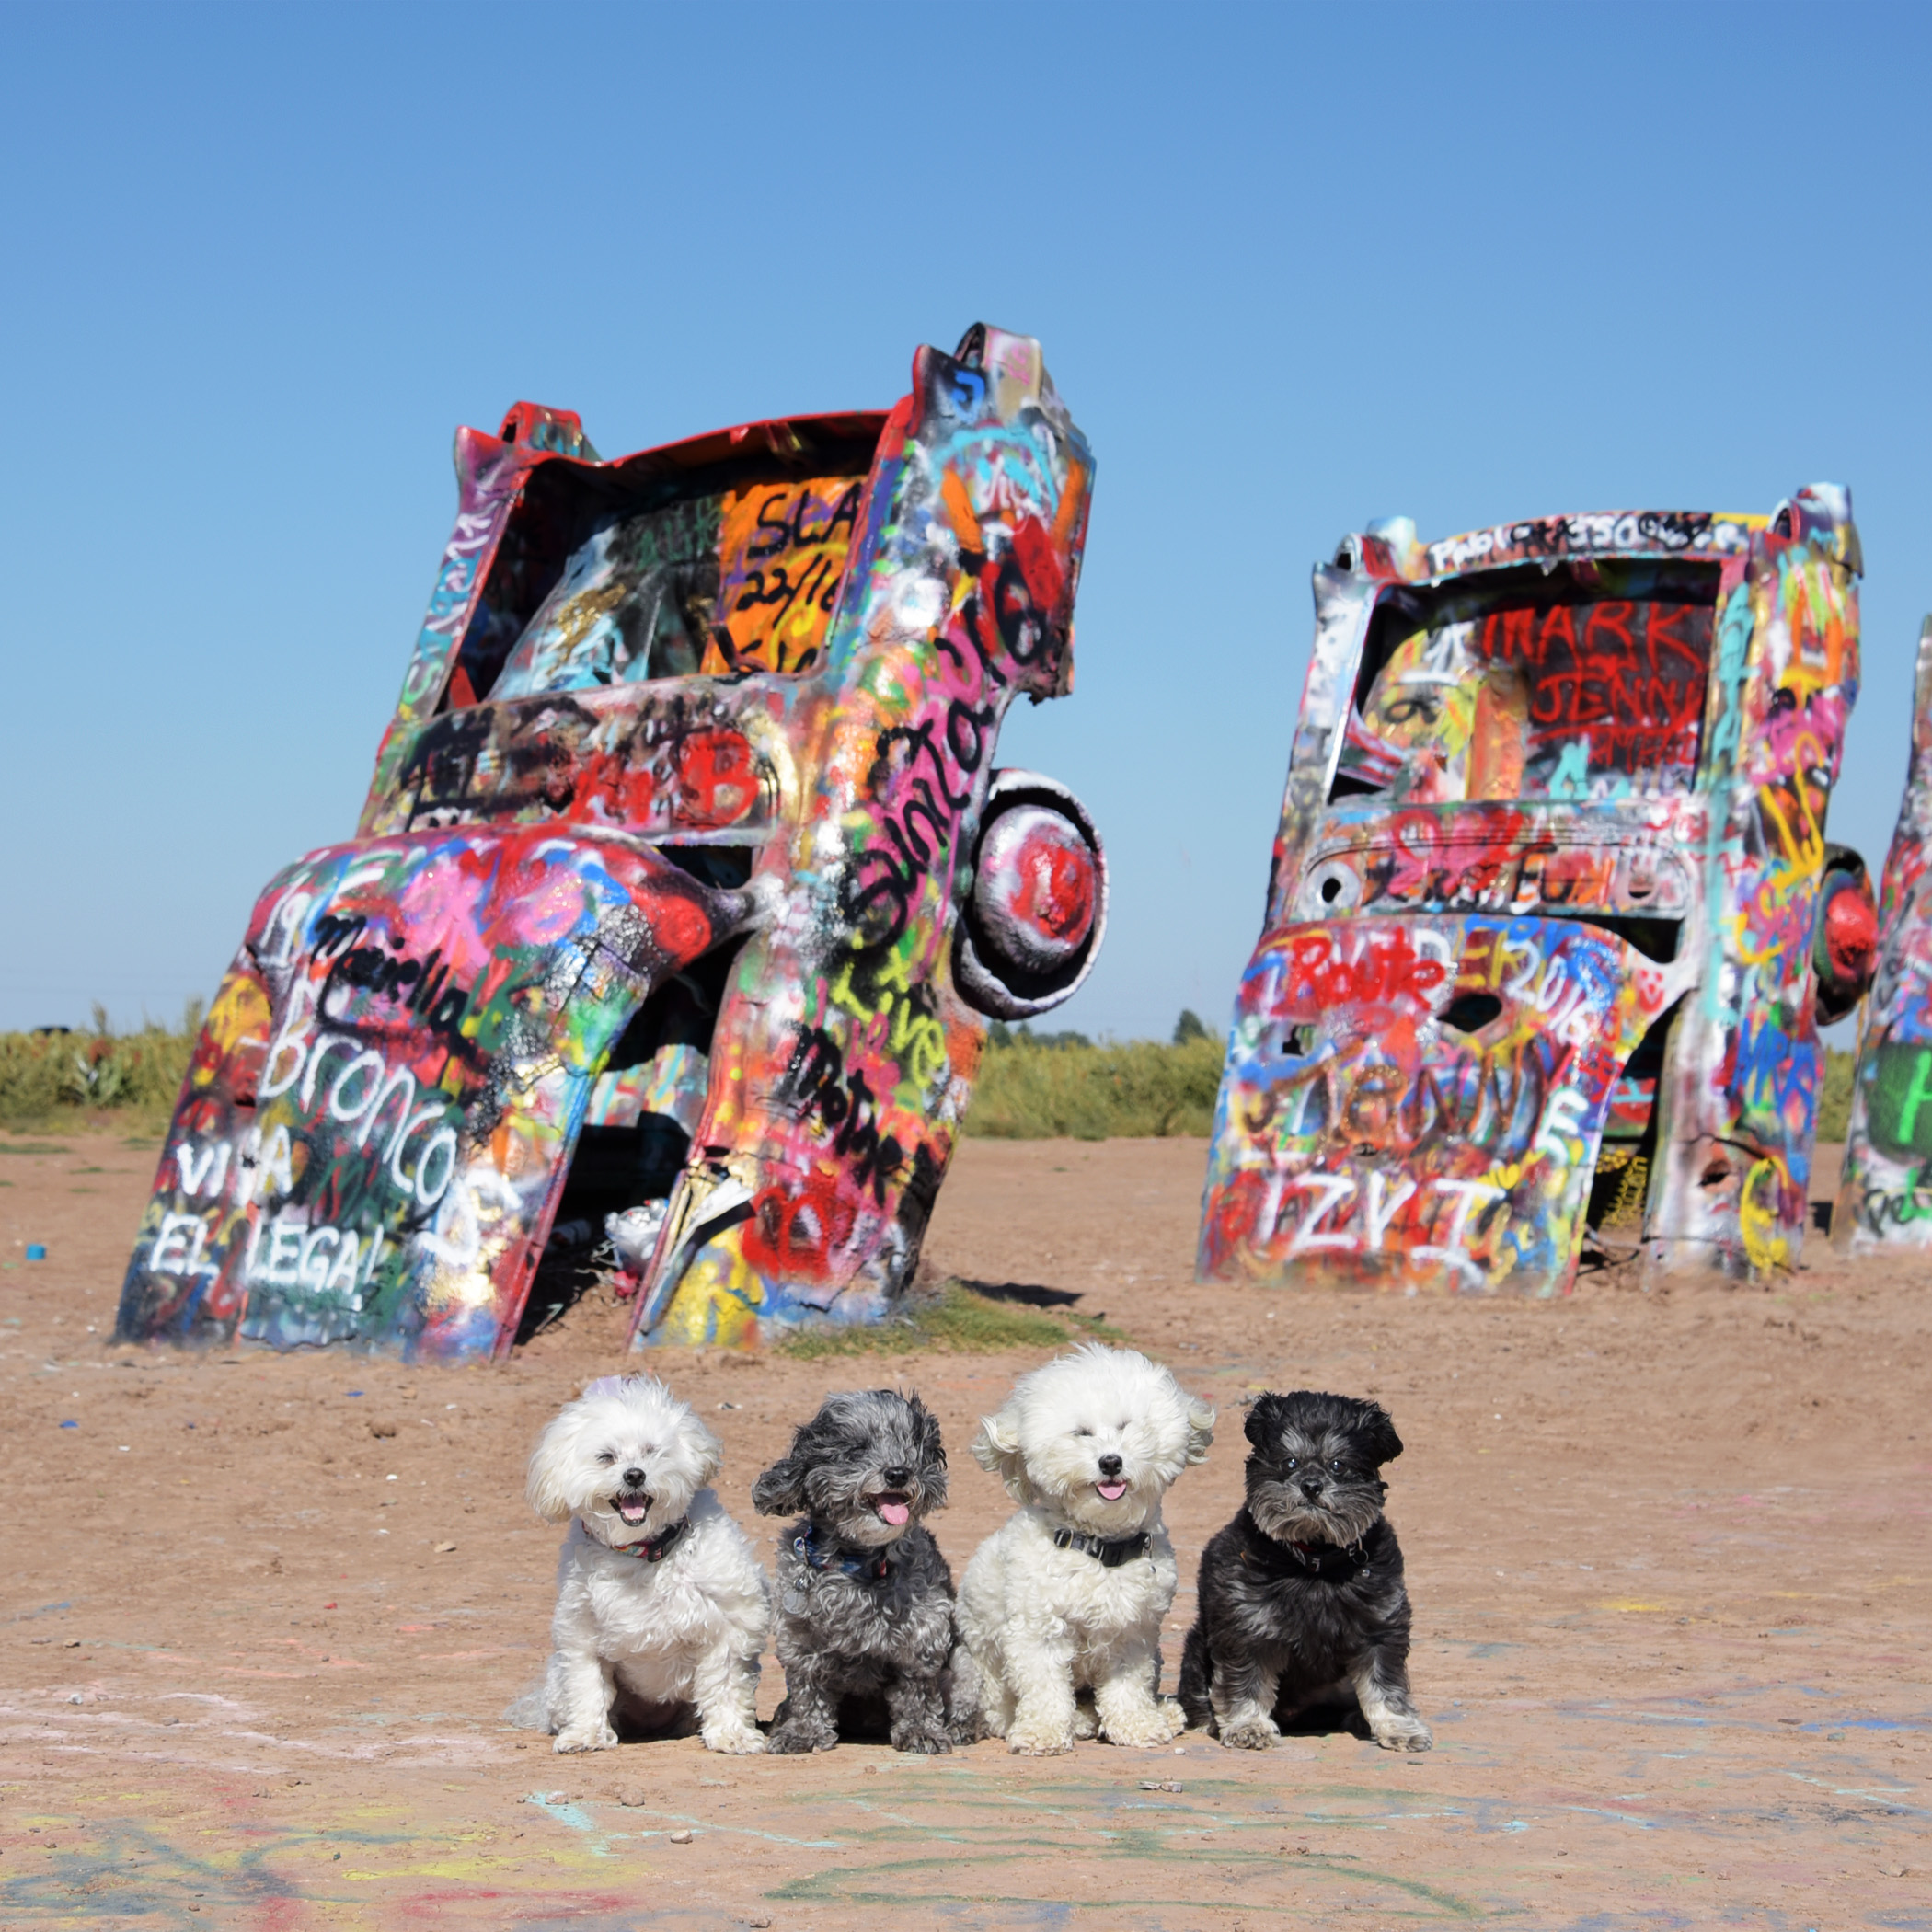  Just outside of Amarillo, Texas is Cadillac Ranch, a public art installation and sculpture. Various Cadillacs have been half buried, nose first in the ground. Writing graffiti or spray painting is actually encouraged, so every time you see the insta